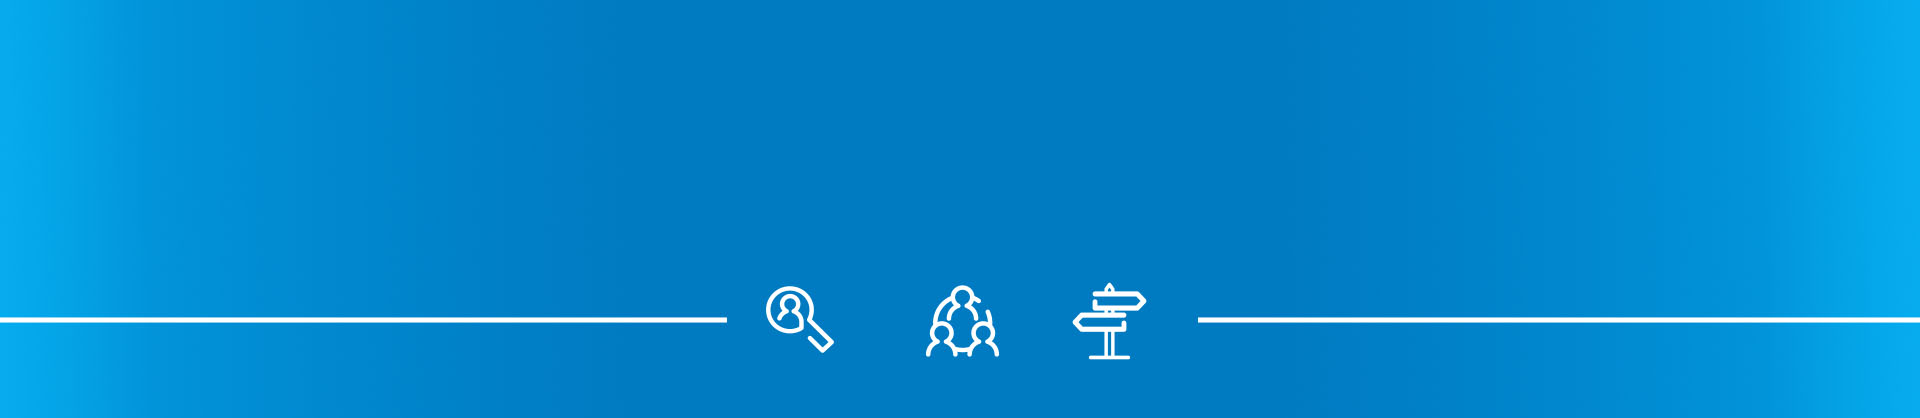 Blue graphic with employee icons